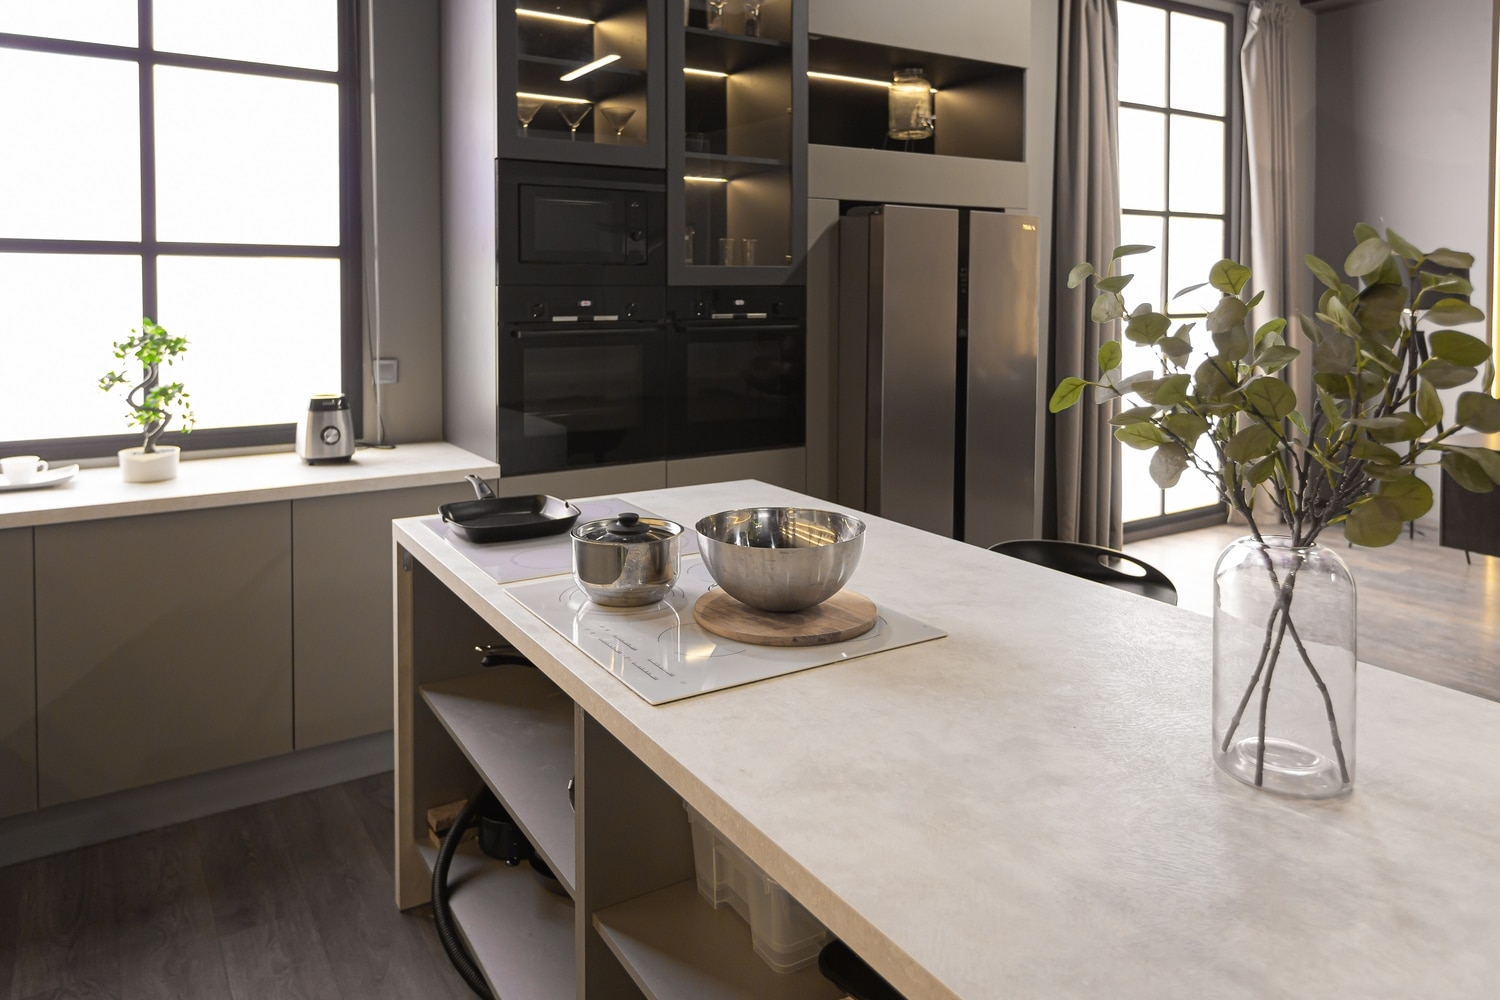 Best kitchen cabinets in Vancouver, British Columbia